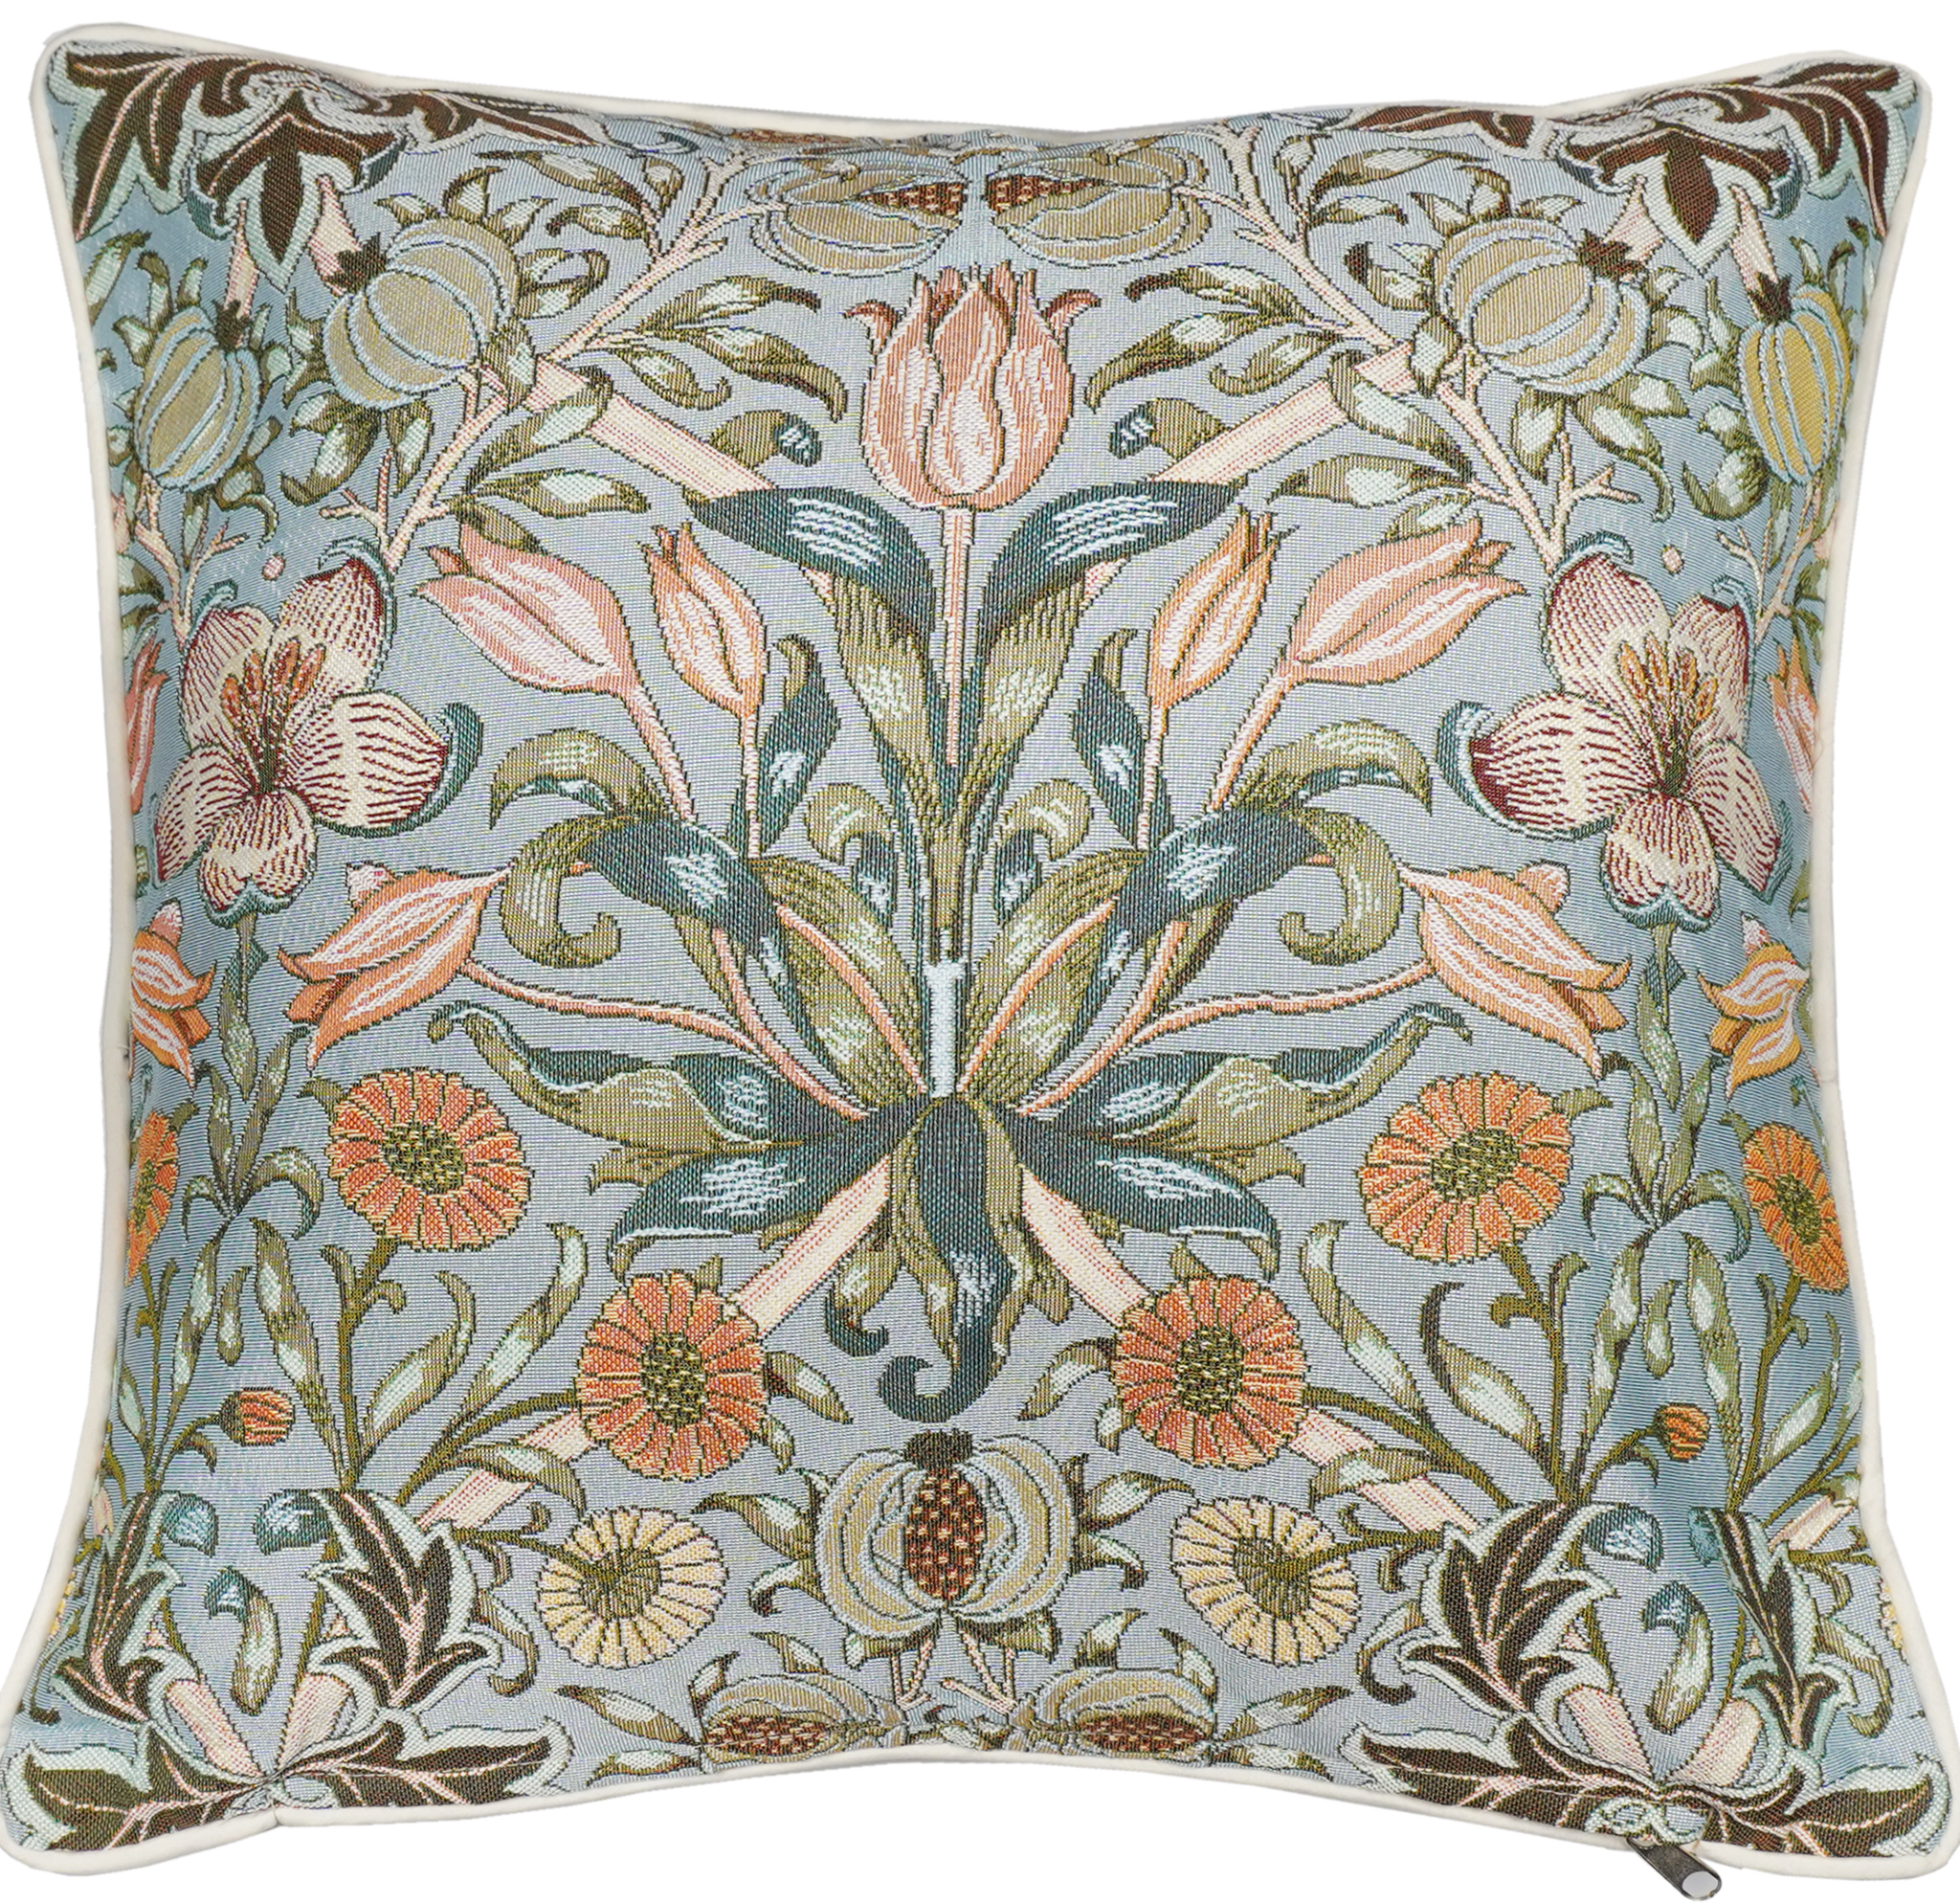 CCOV-PN-POME | WILLIAM MORRIS POMEGRANATE & LILY- PANELLED PILLOWCASE/CUSHION COVER 18X18 INCH